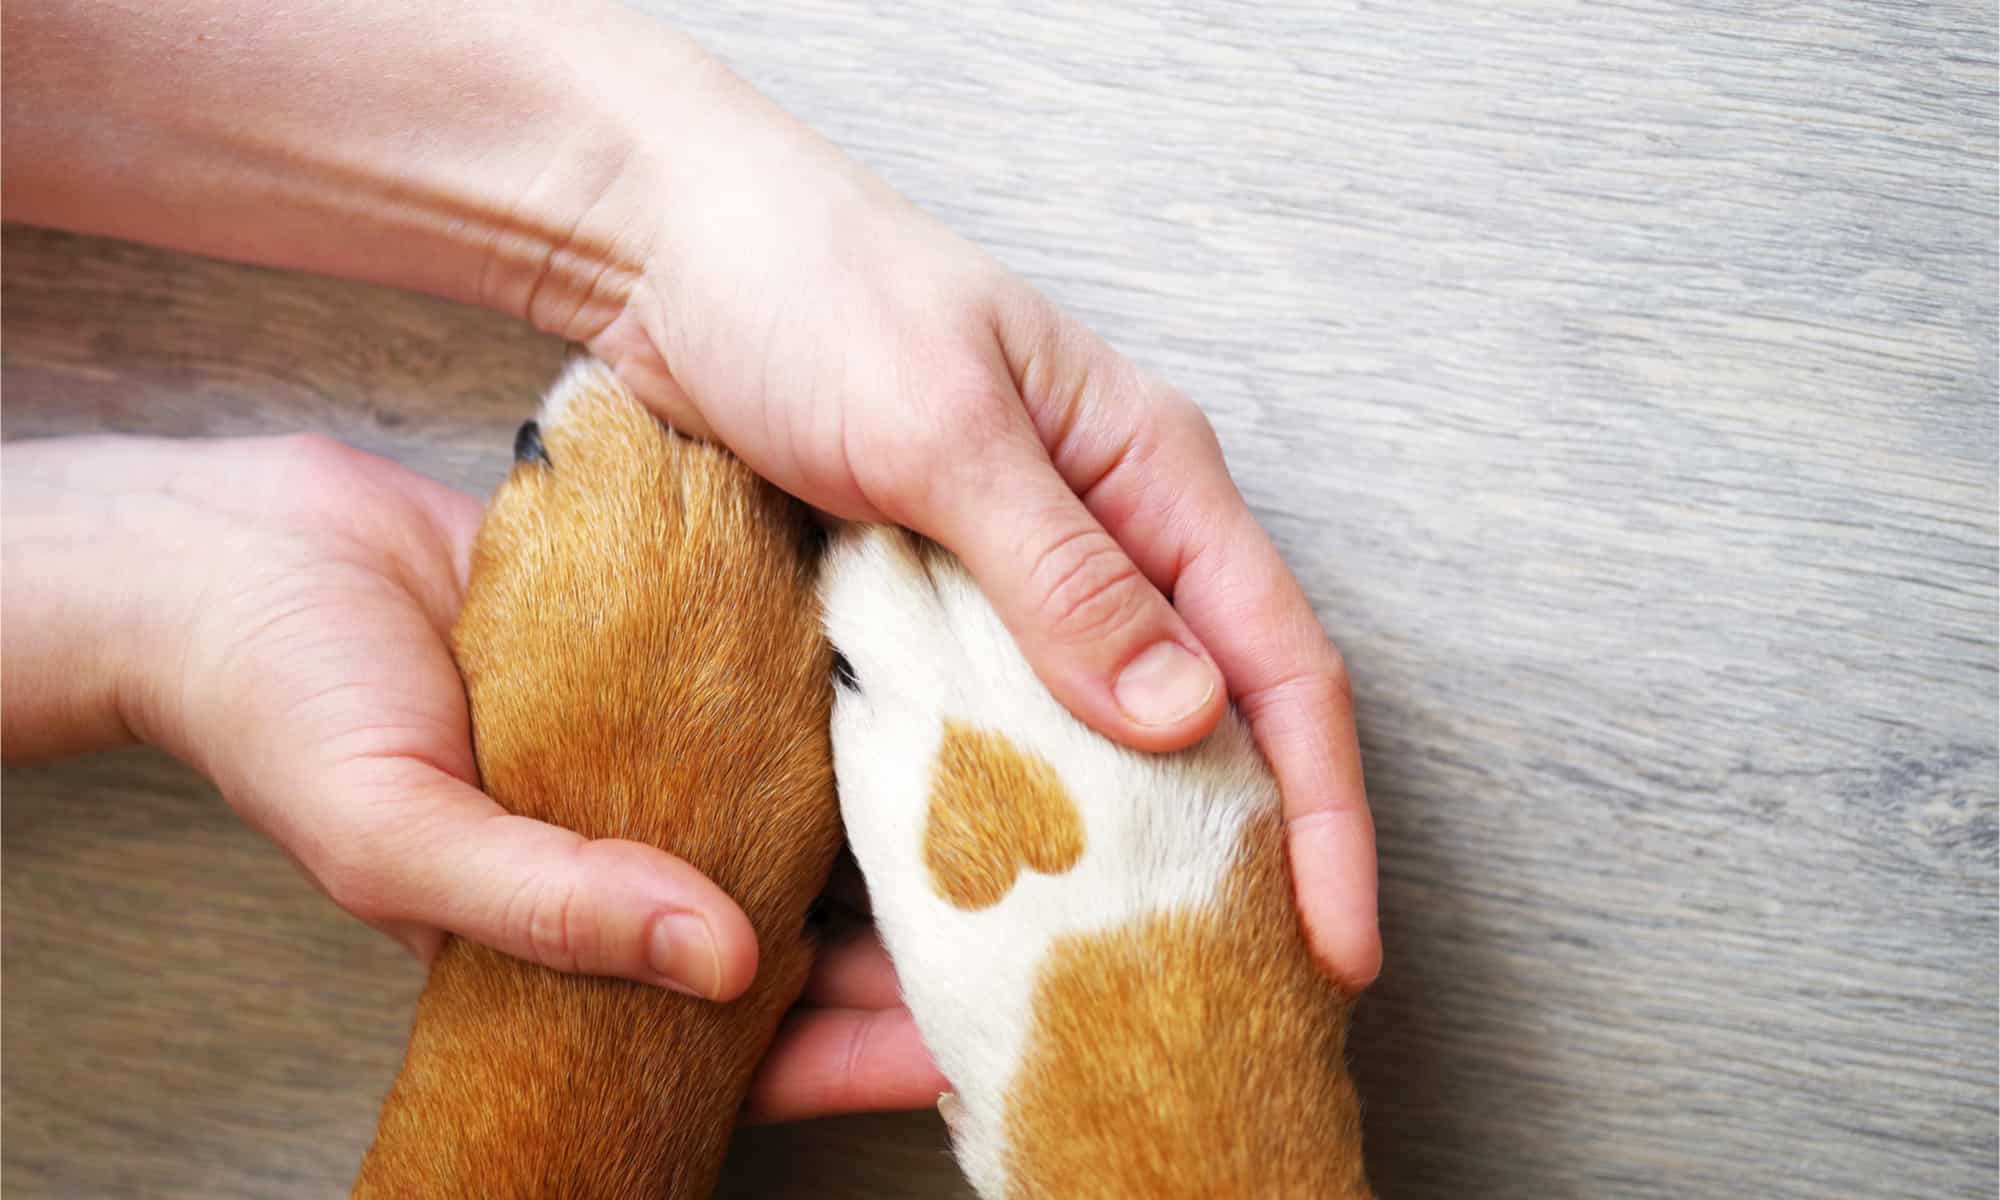 Two dog paws, one with a heart-shaped marking, being held by a human